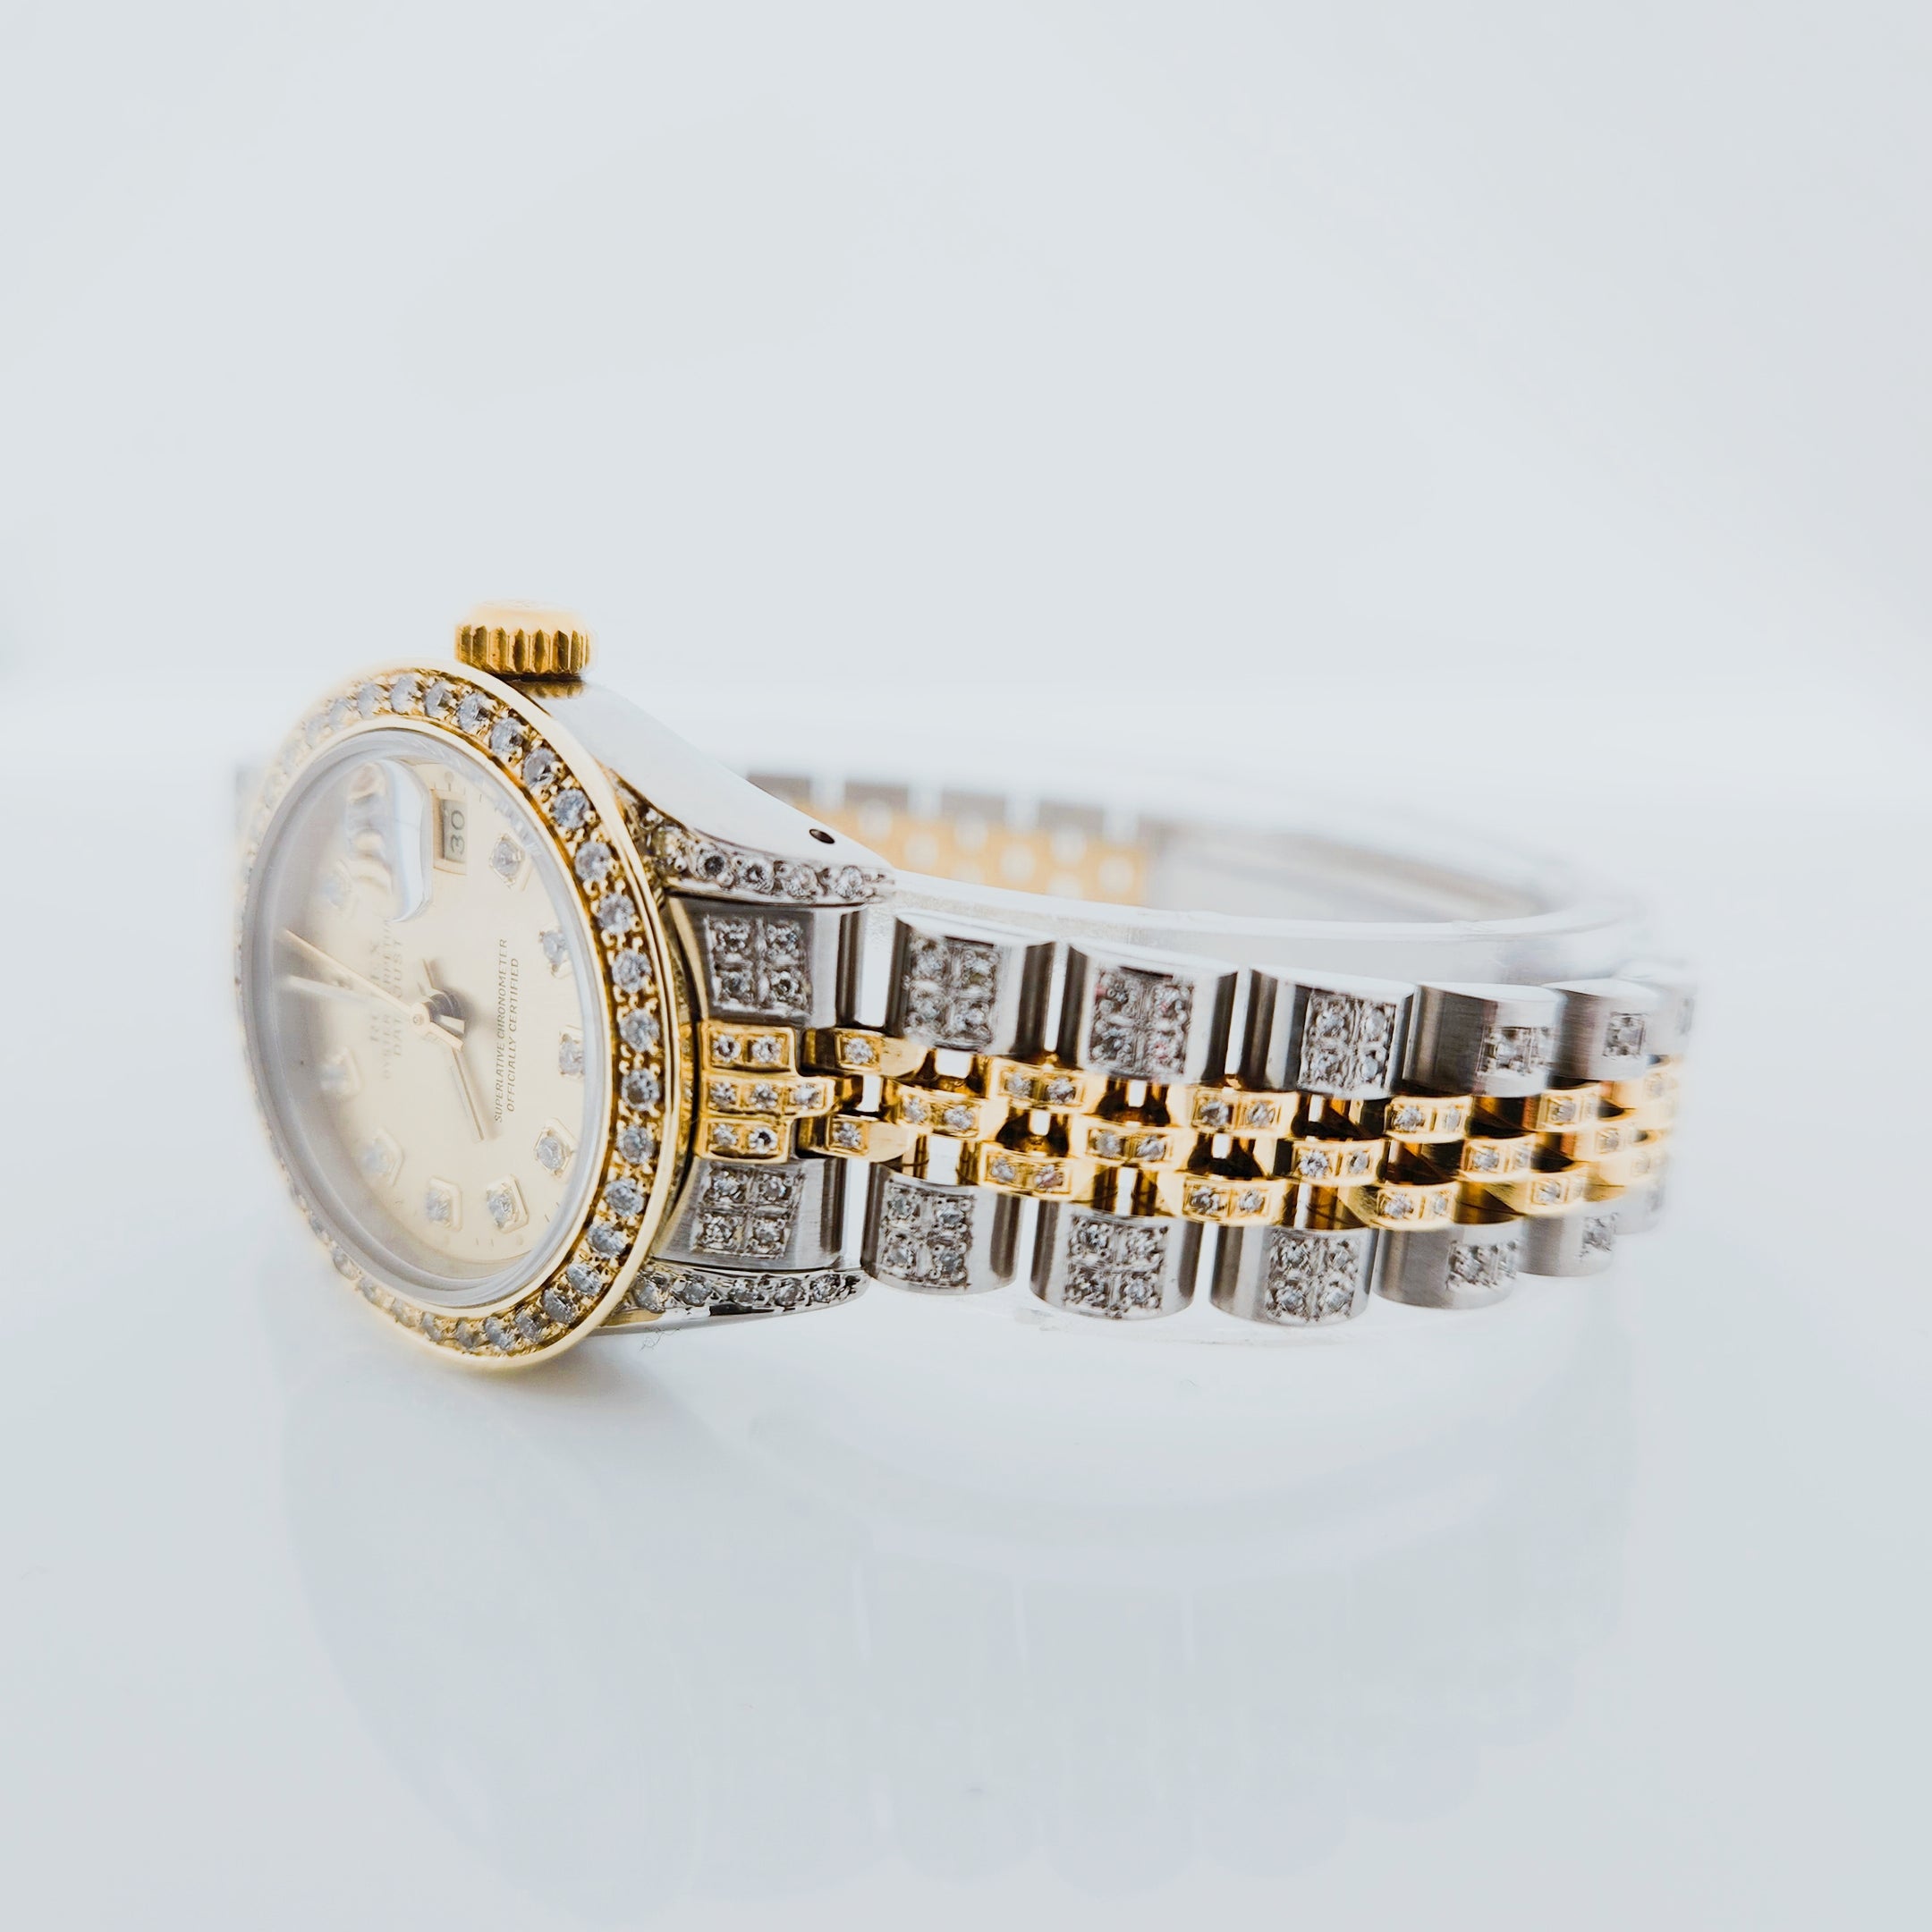 Ladies Rolex 26mm DateJust 18K Gold / Stainless Steel Watch with Diamond Band, Diamond Dial and Diamond Bezel. (Pre-Owned)